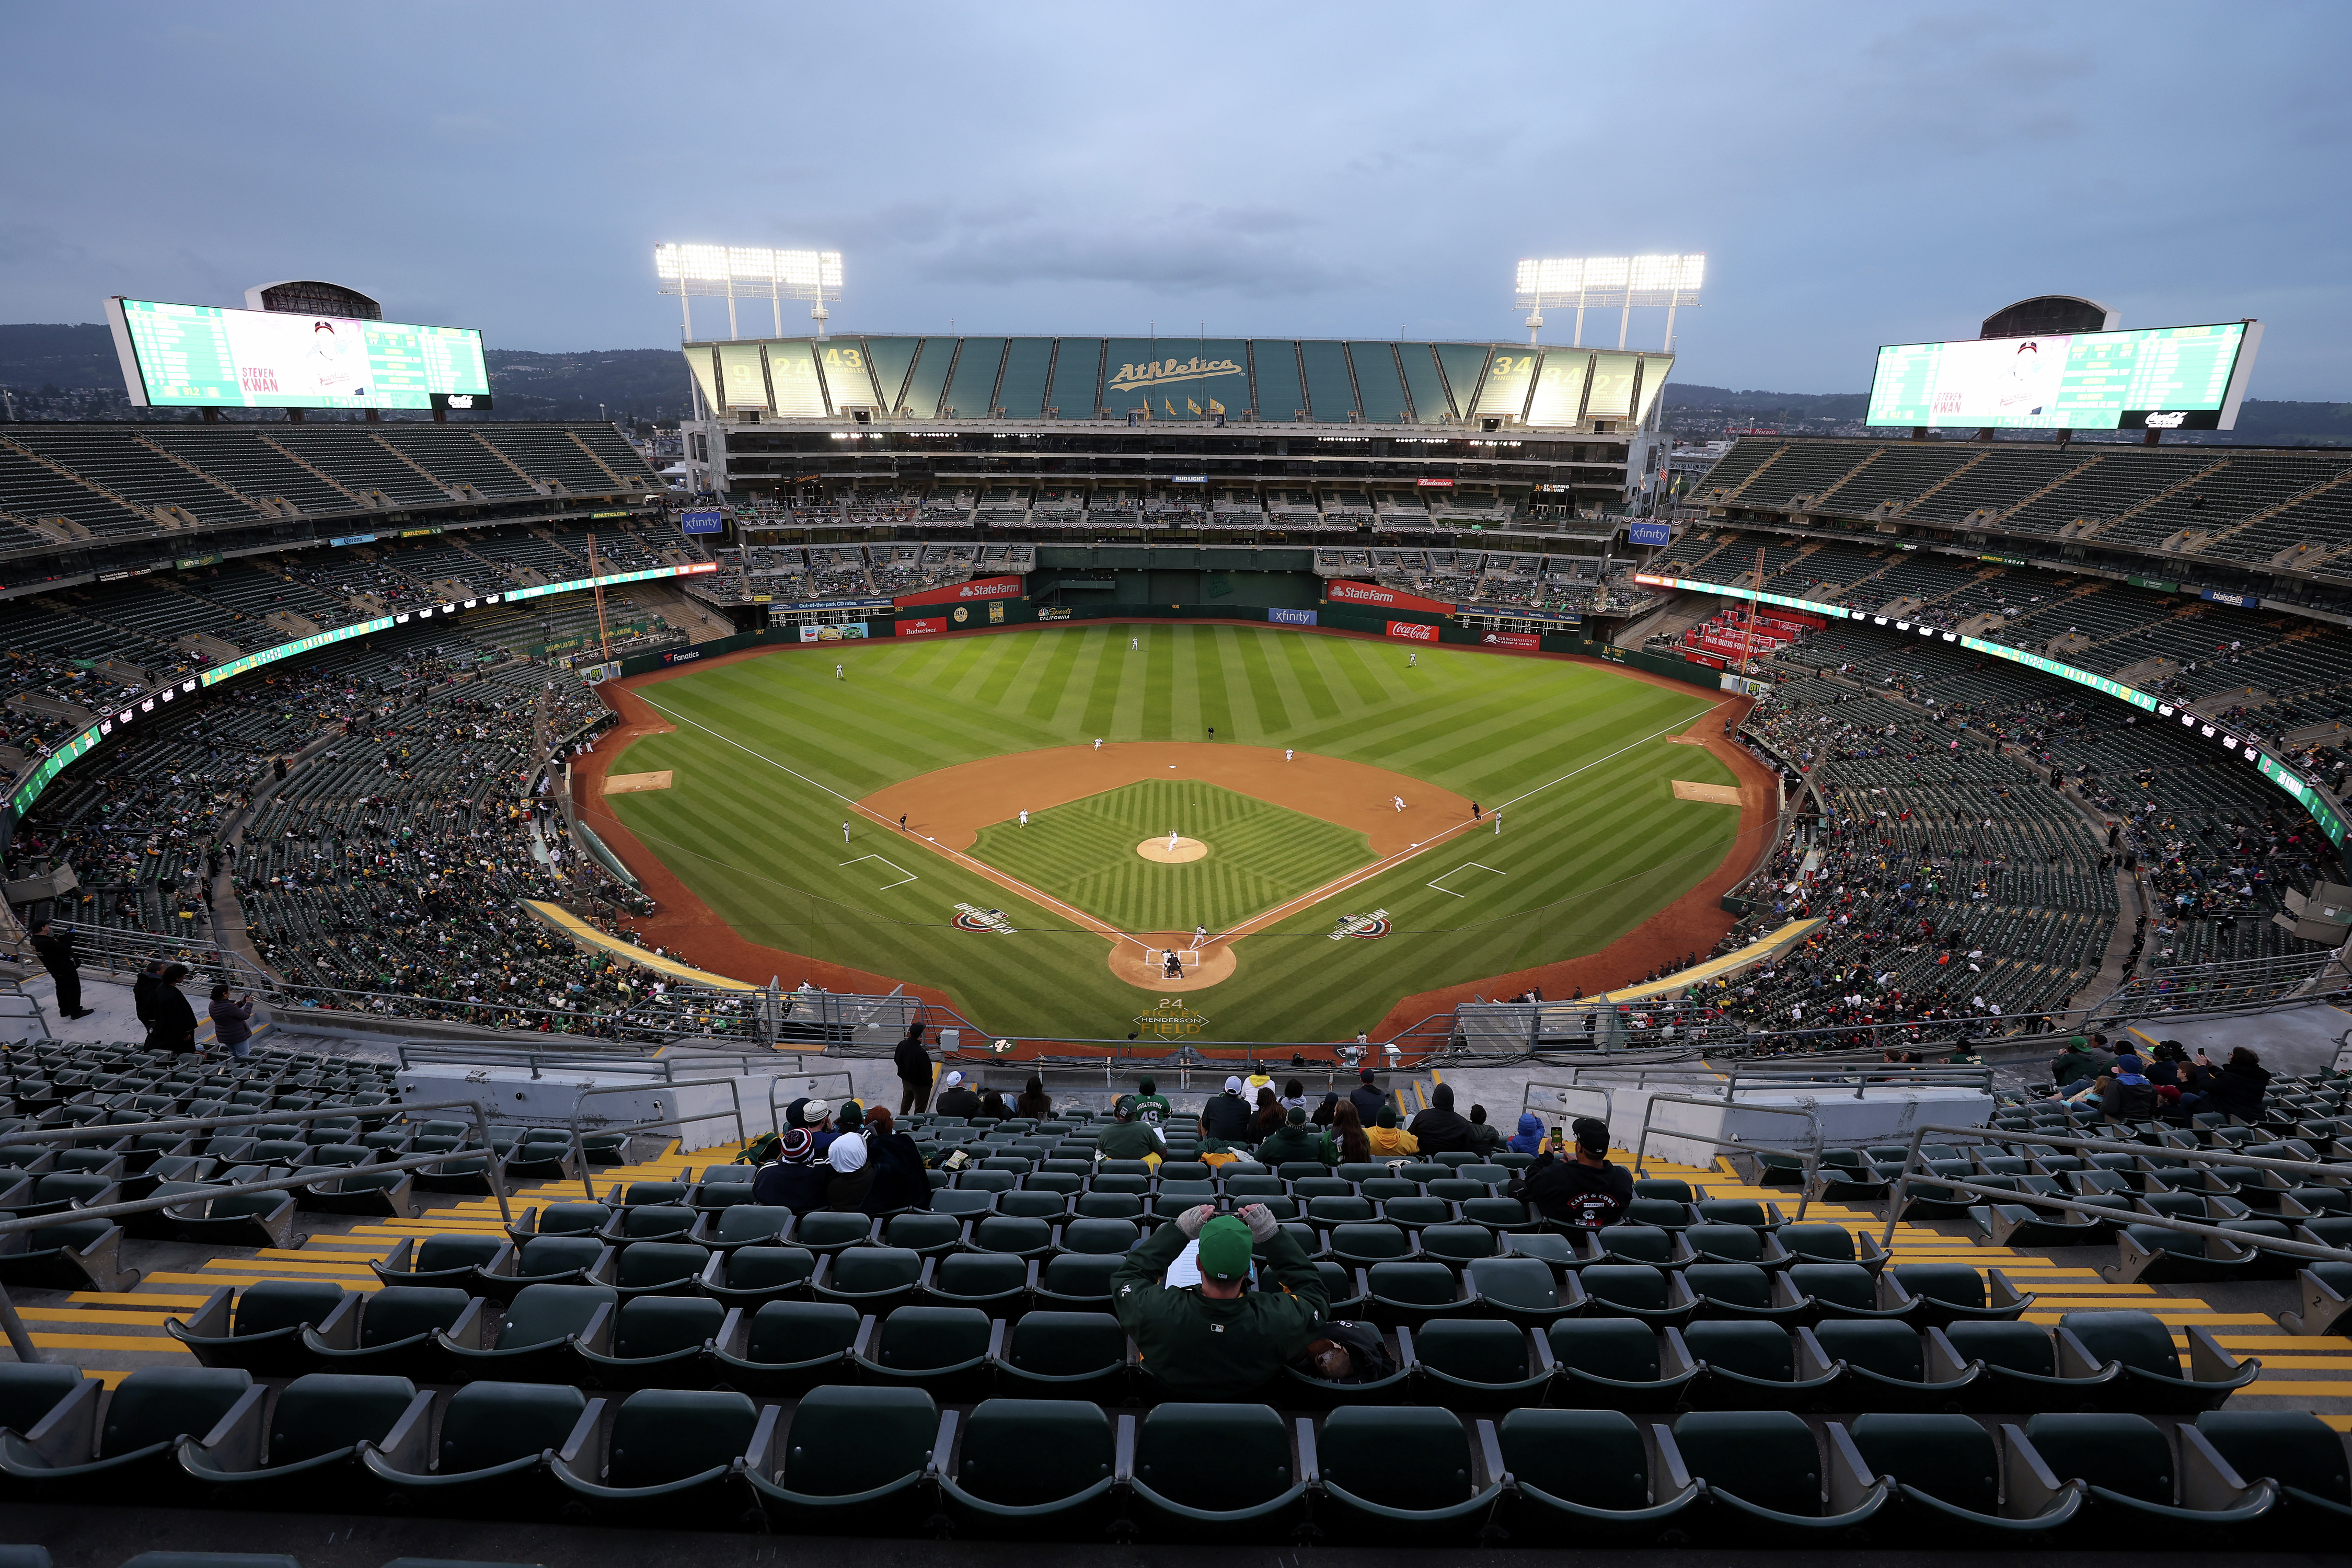 City of Oakland to sell half of Coliseum to an African American sports group